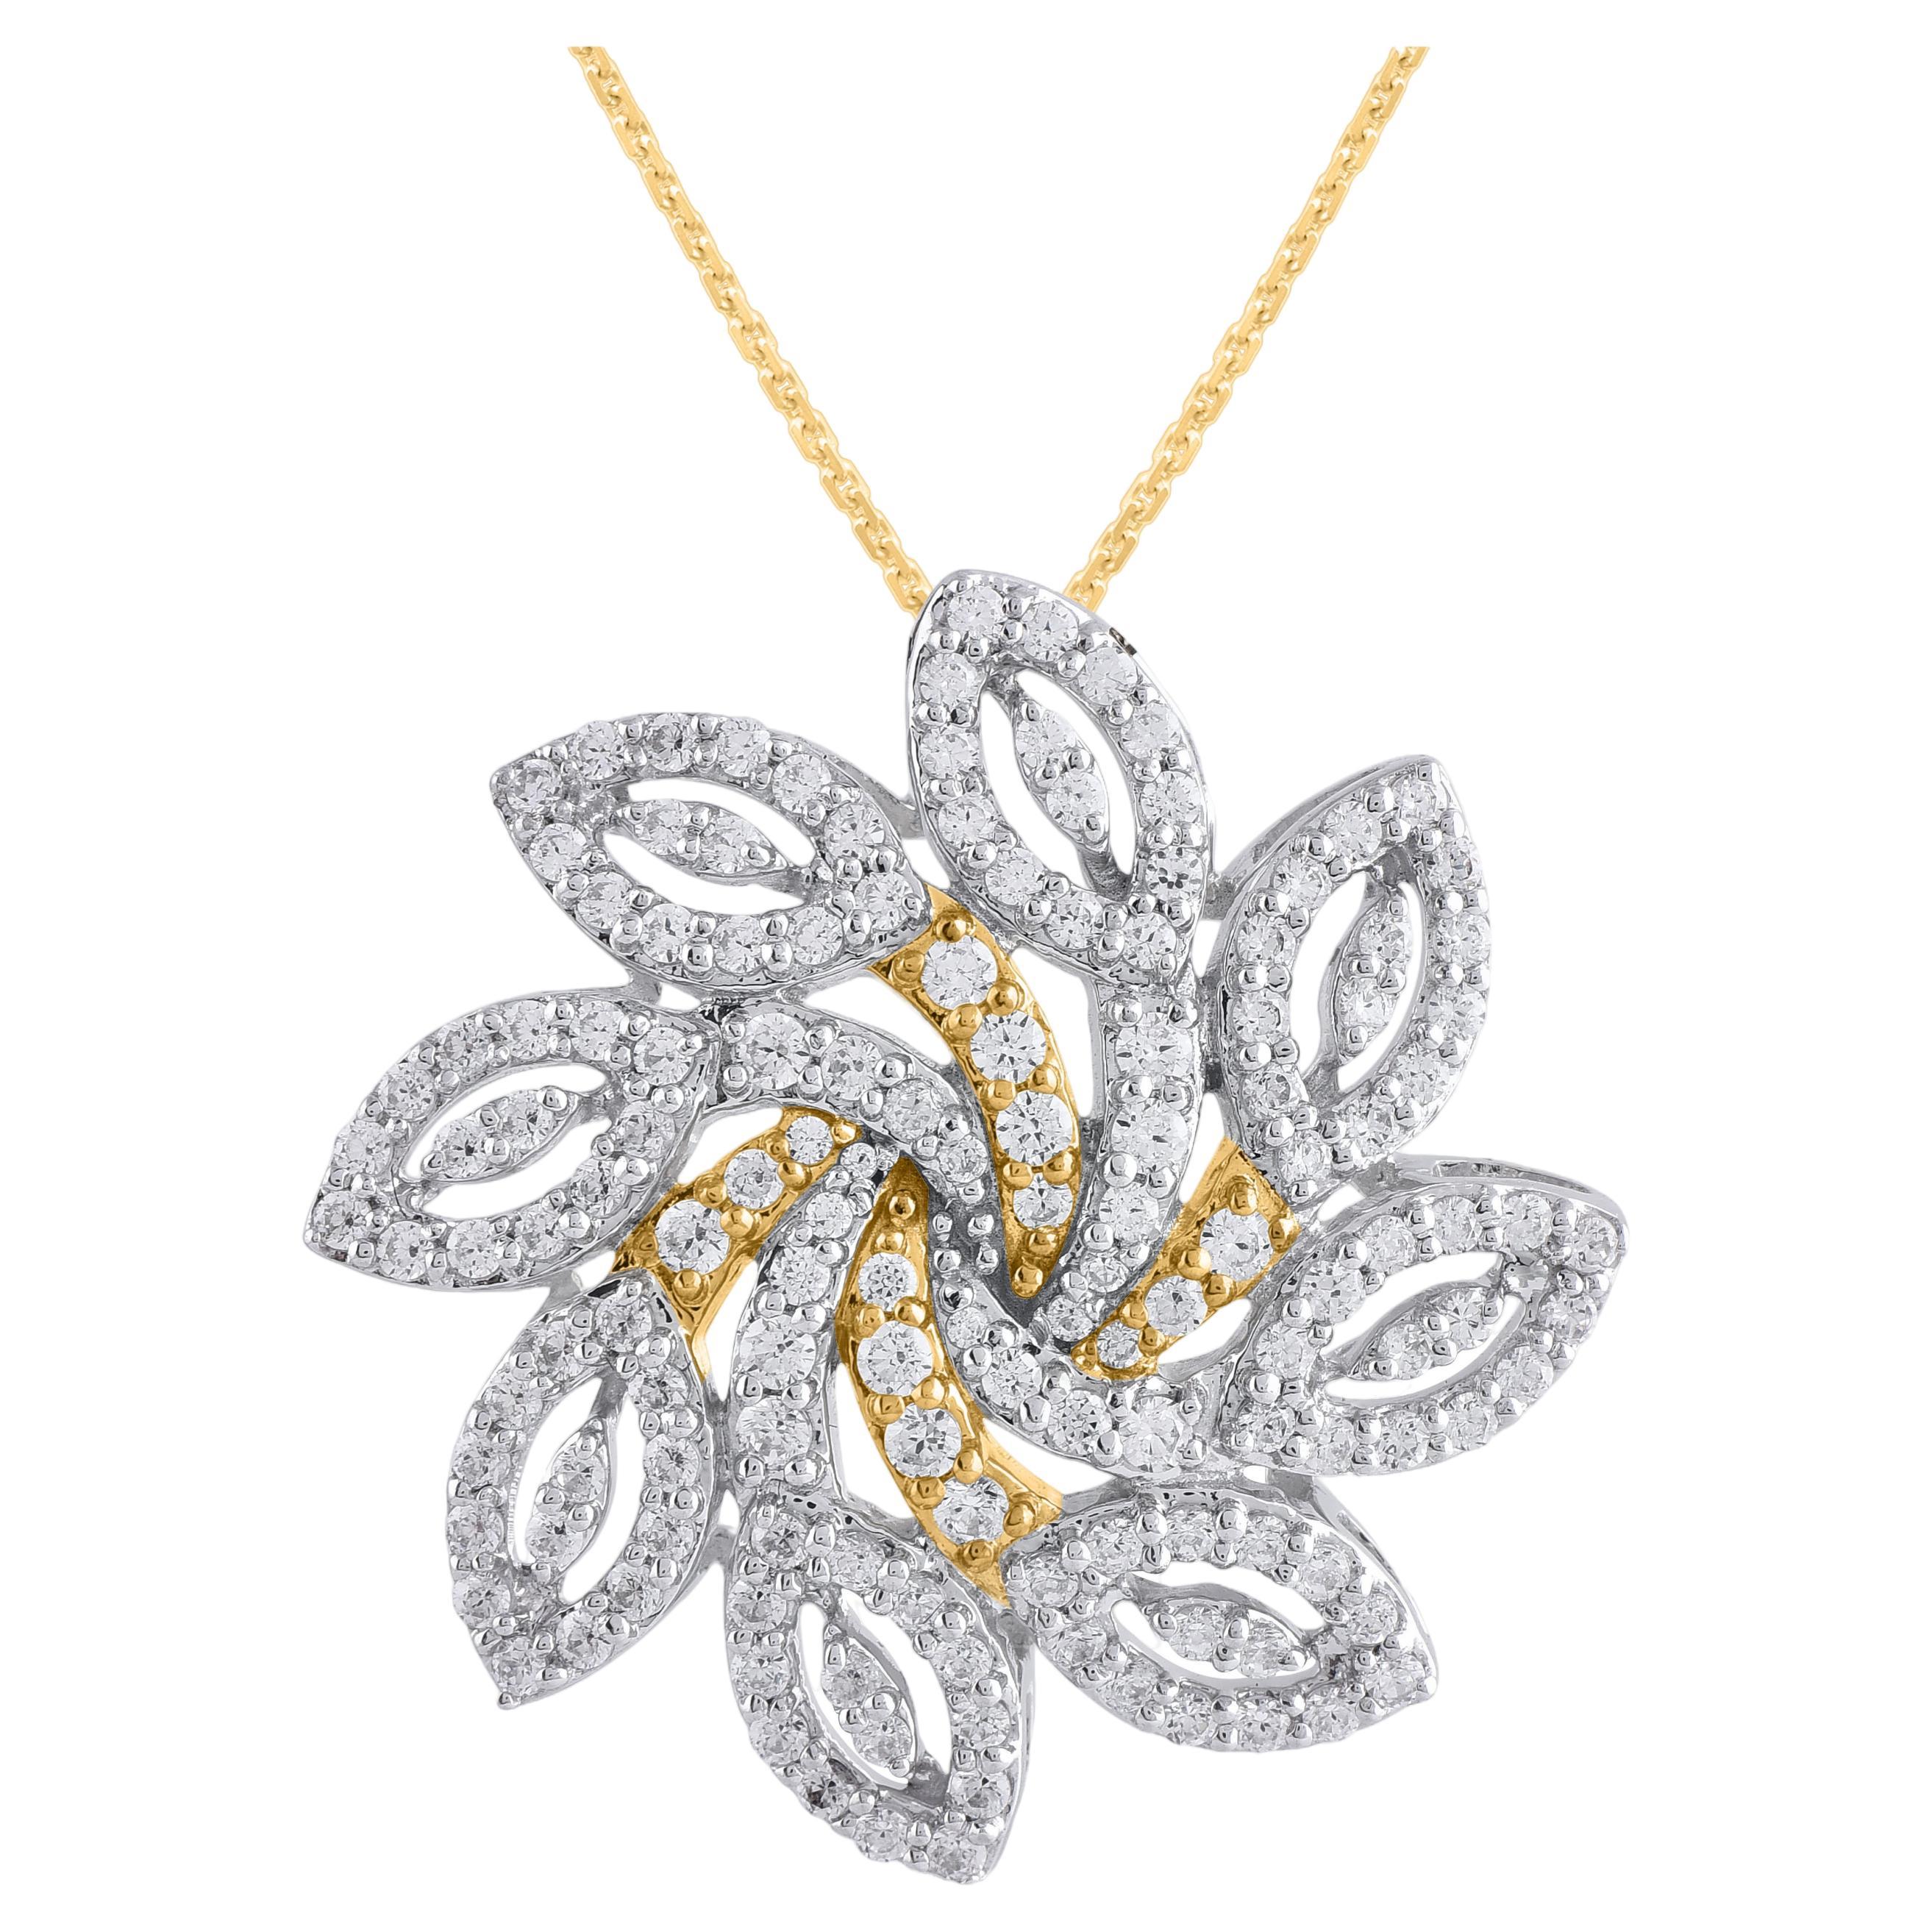 TJD 1.0 Carat Natural Round Cut Diamond Floral Pendant in 18KT Two Tone Gold 